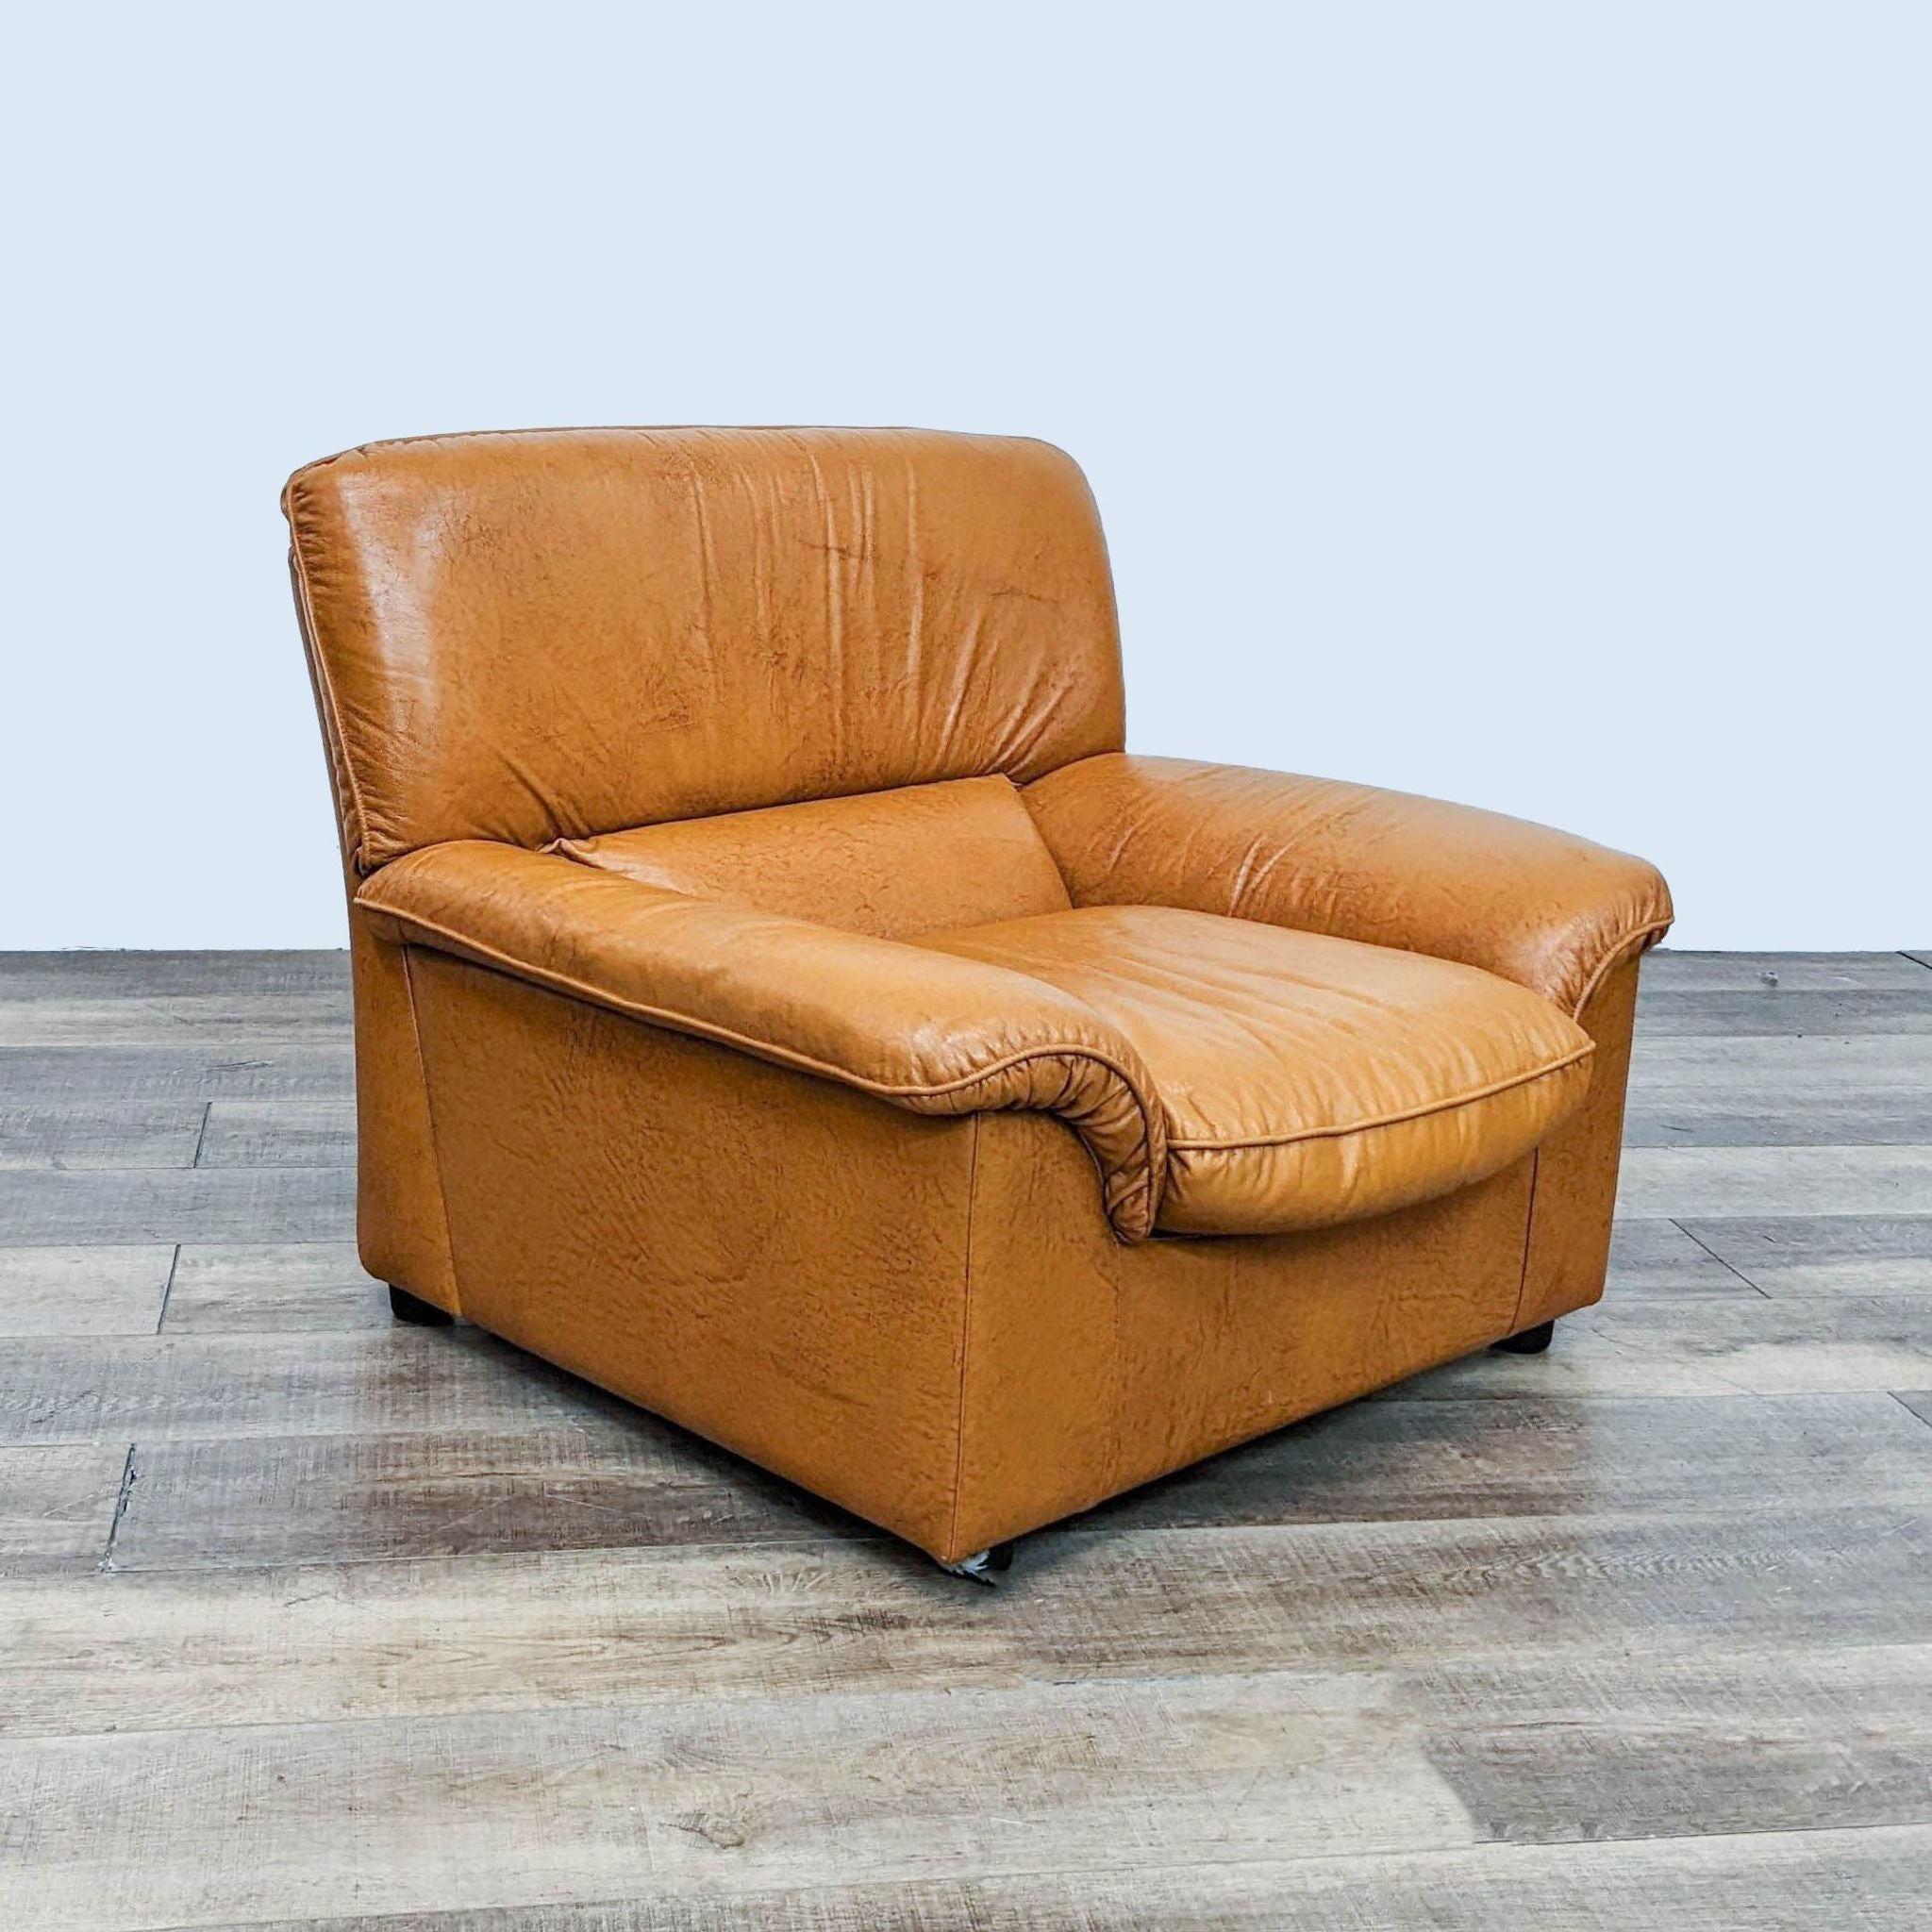 Reperch contemporary leather club chair with rounded arms and wooden feet on a wooden floor.